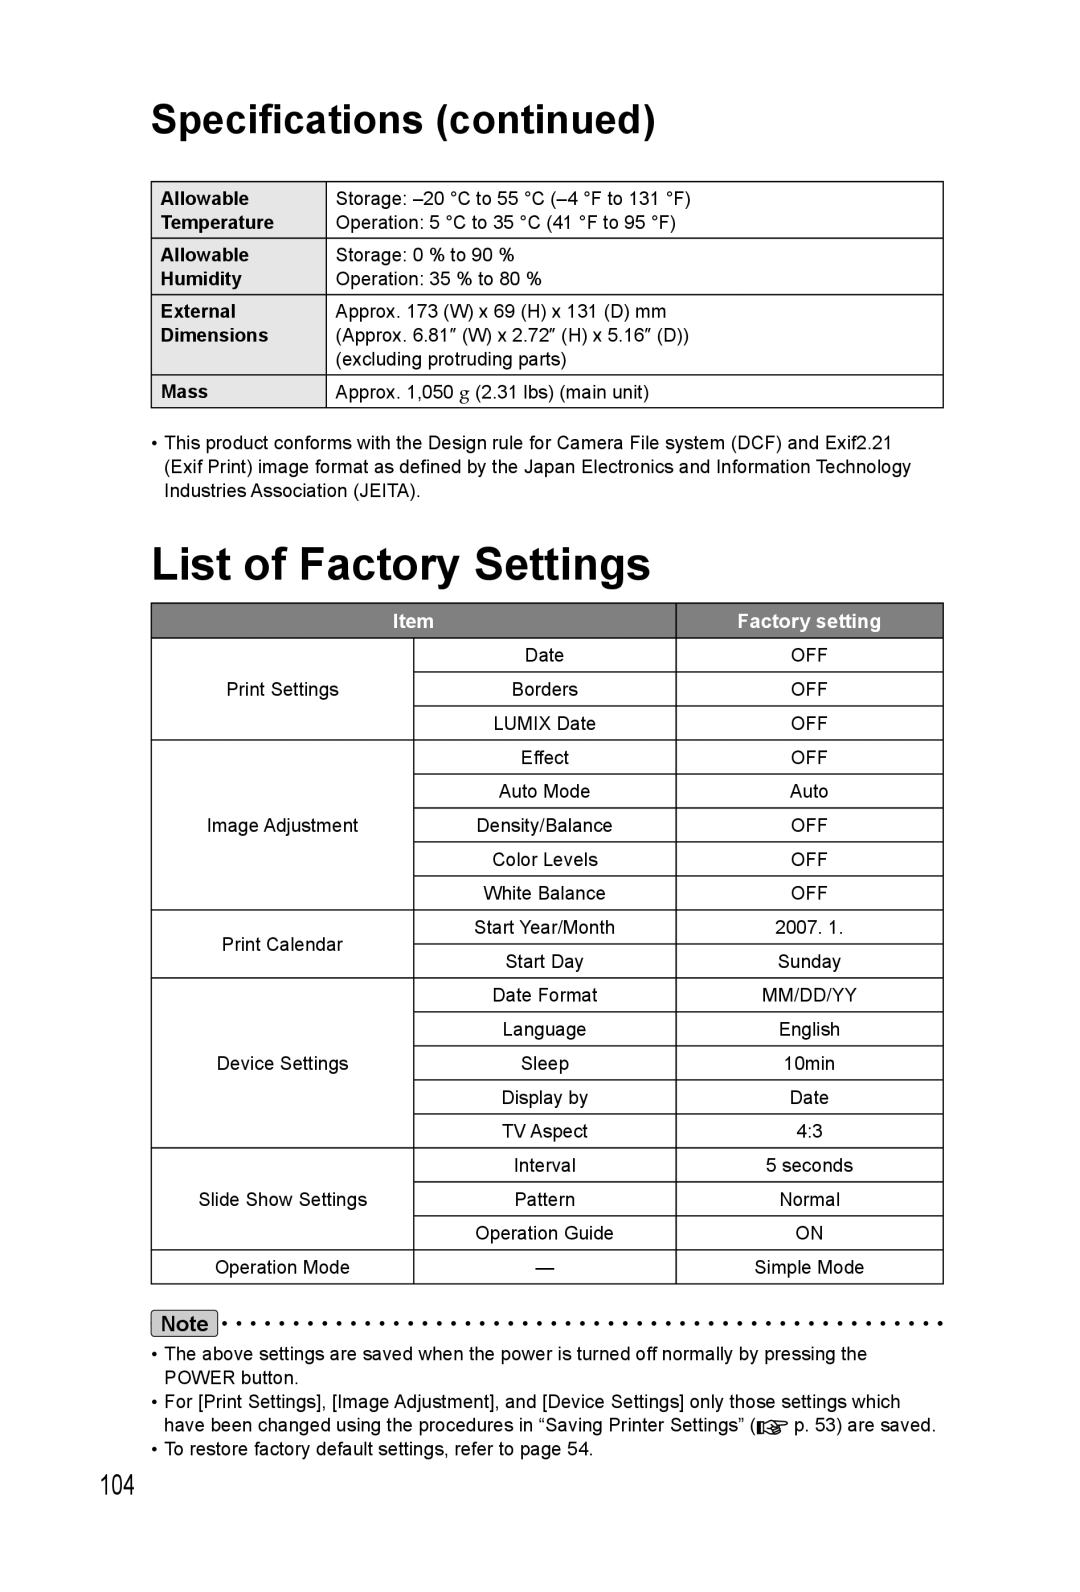 Panasonic KX-PX20M operating instructions List of Factory Settings, Specifications continued 